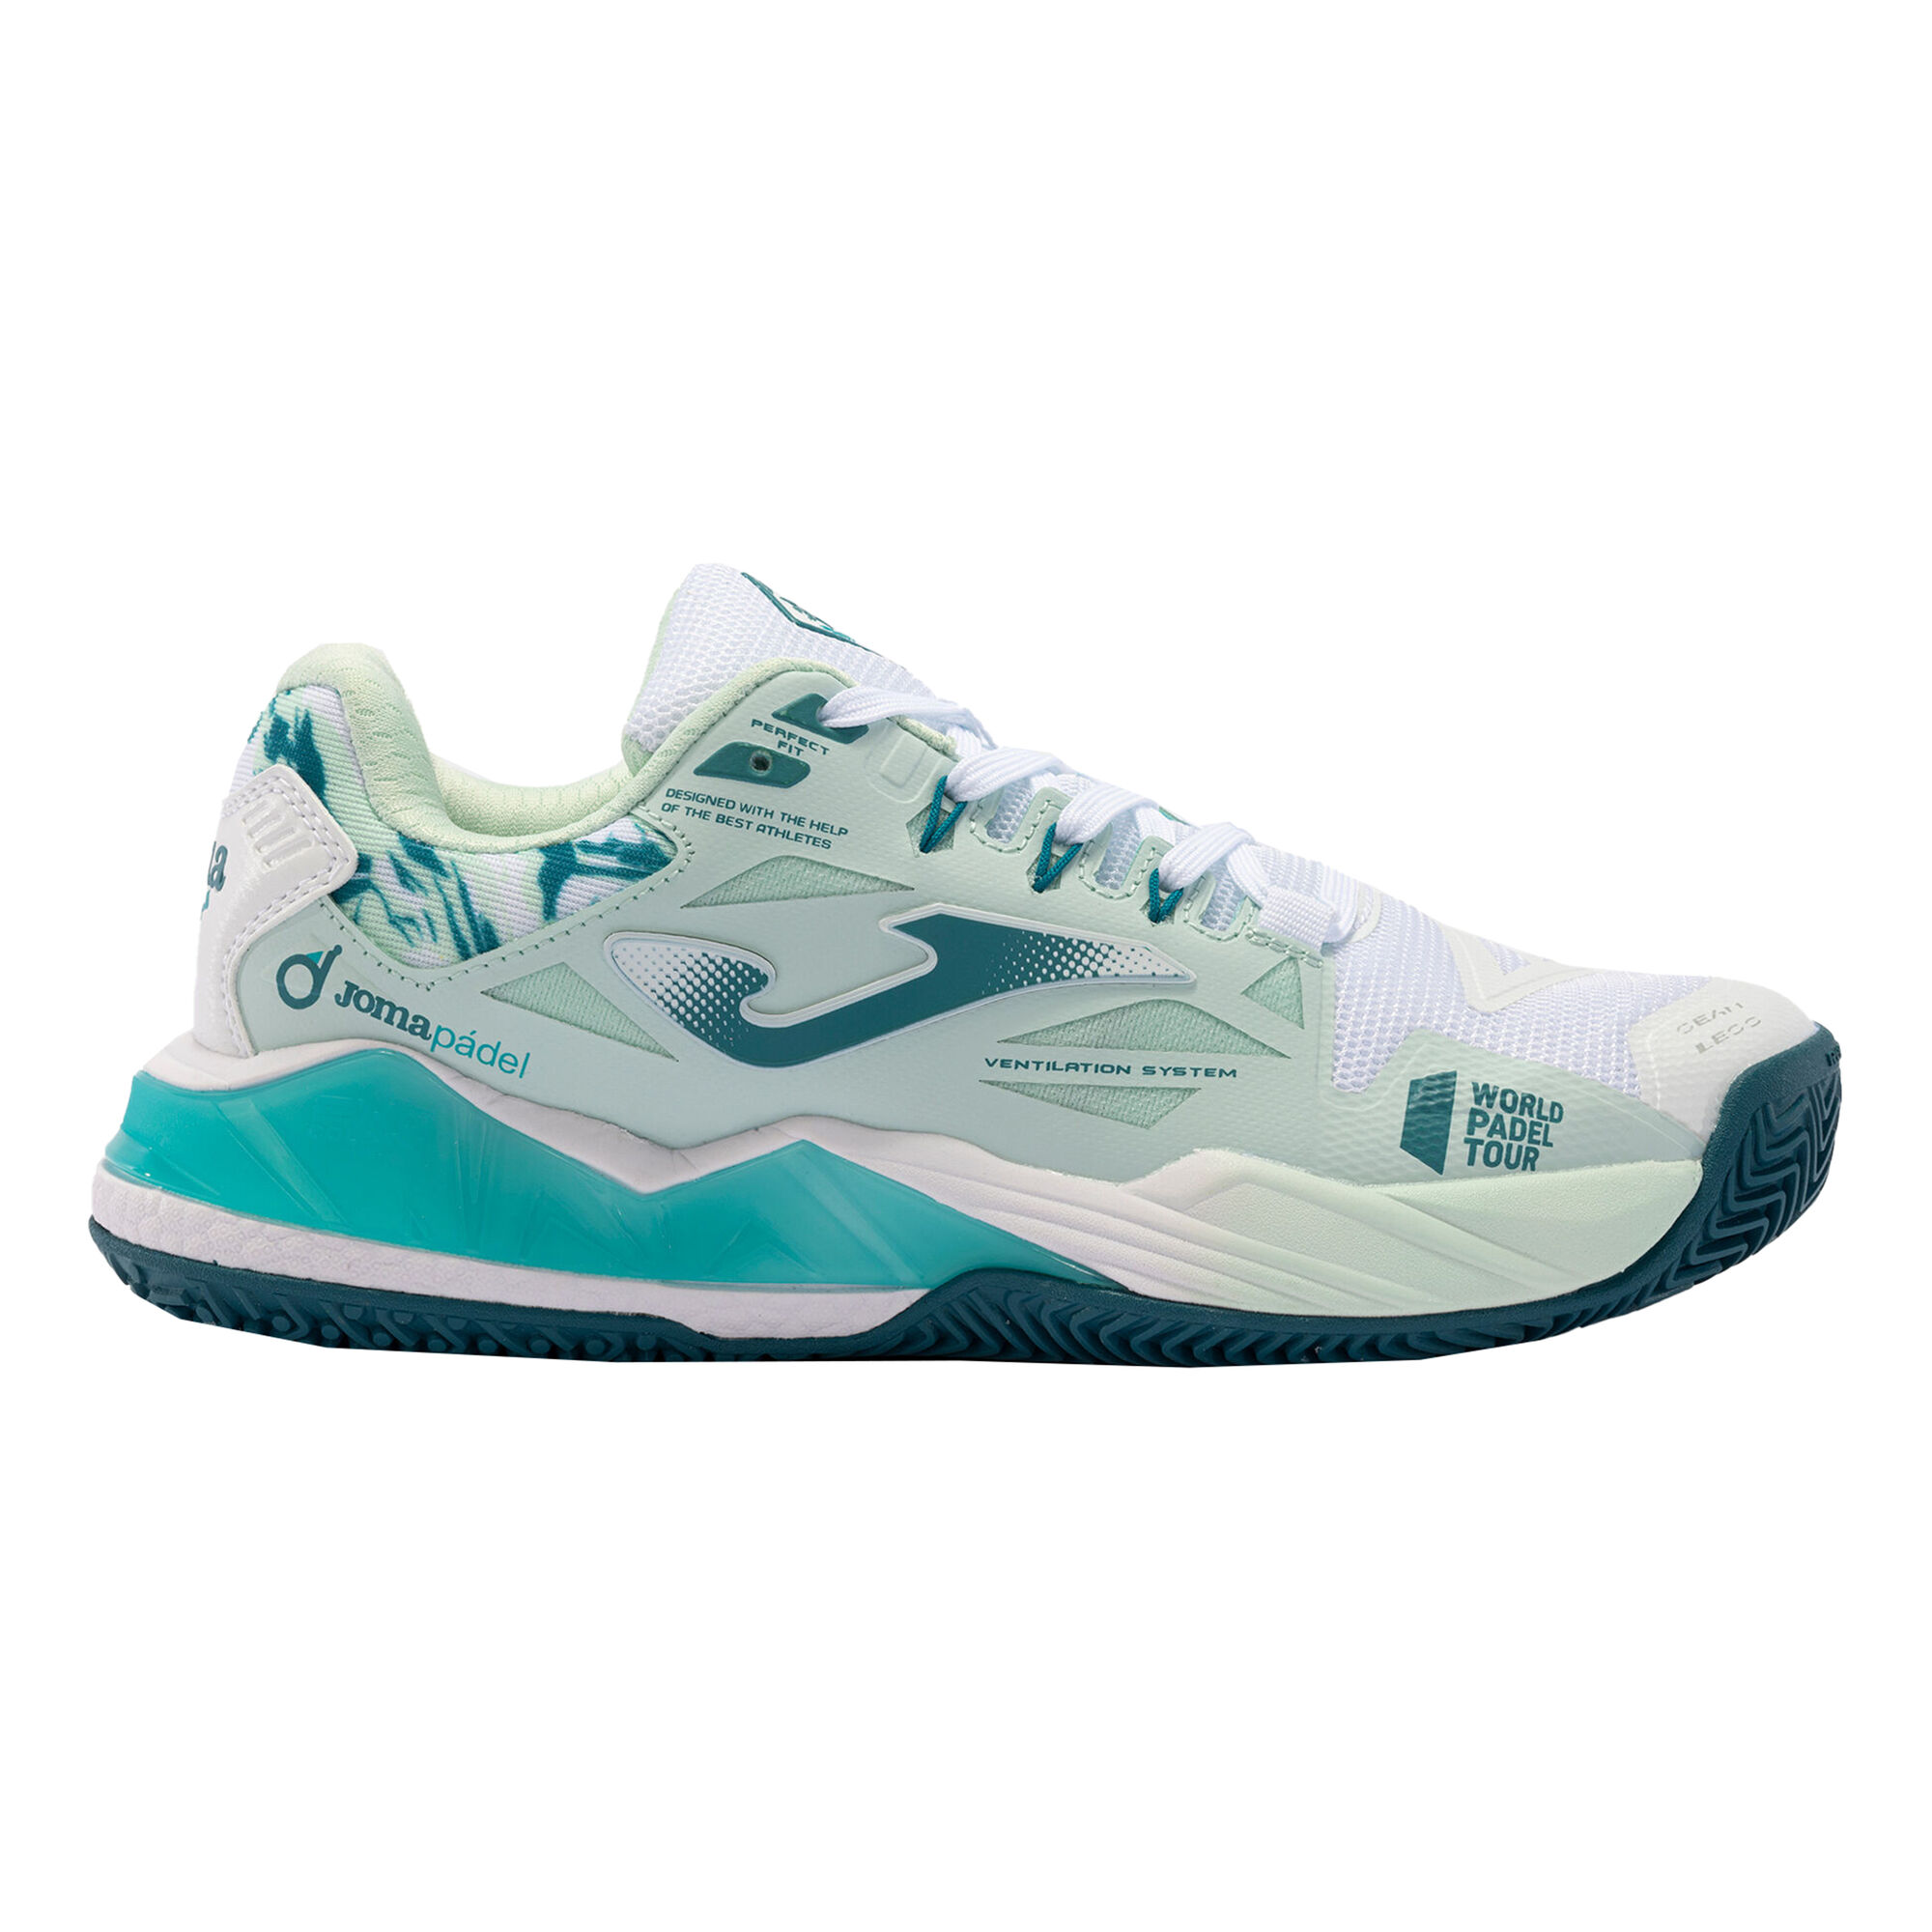 Buy Joma T.Spin Padel Shoe Women Turquoise, White online